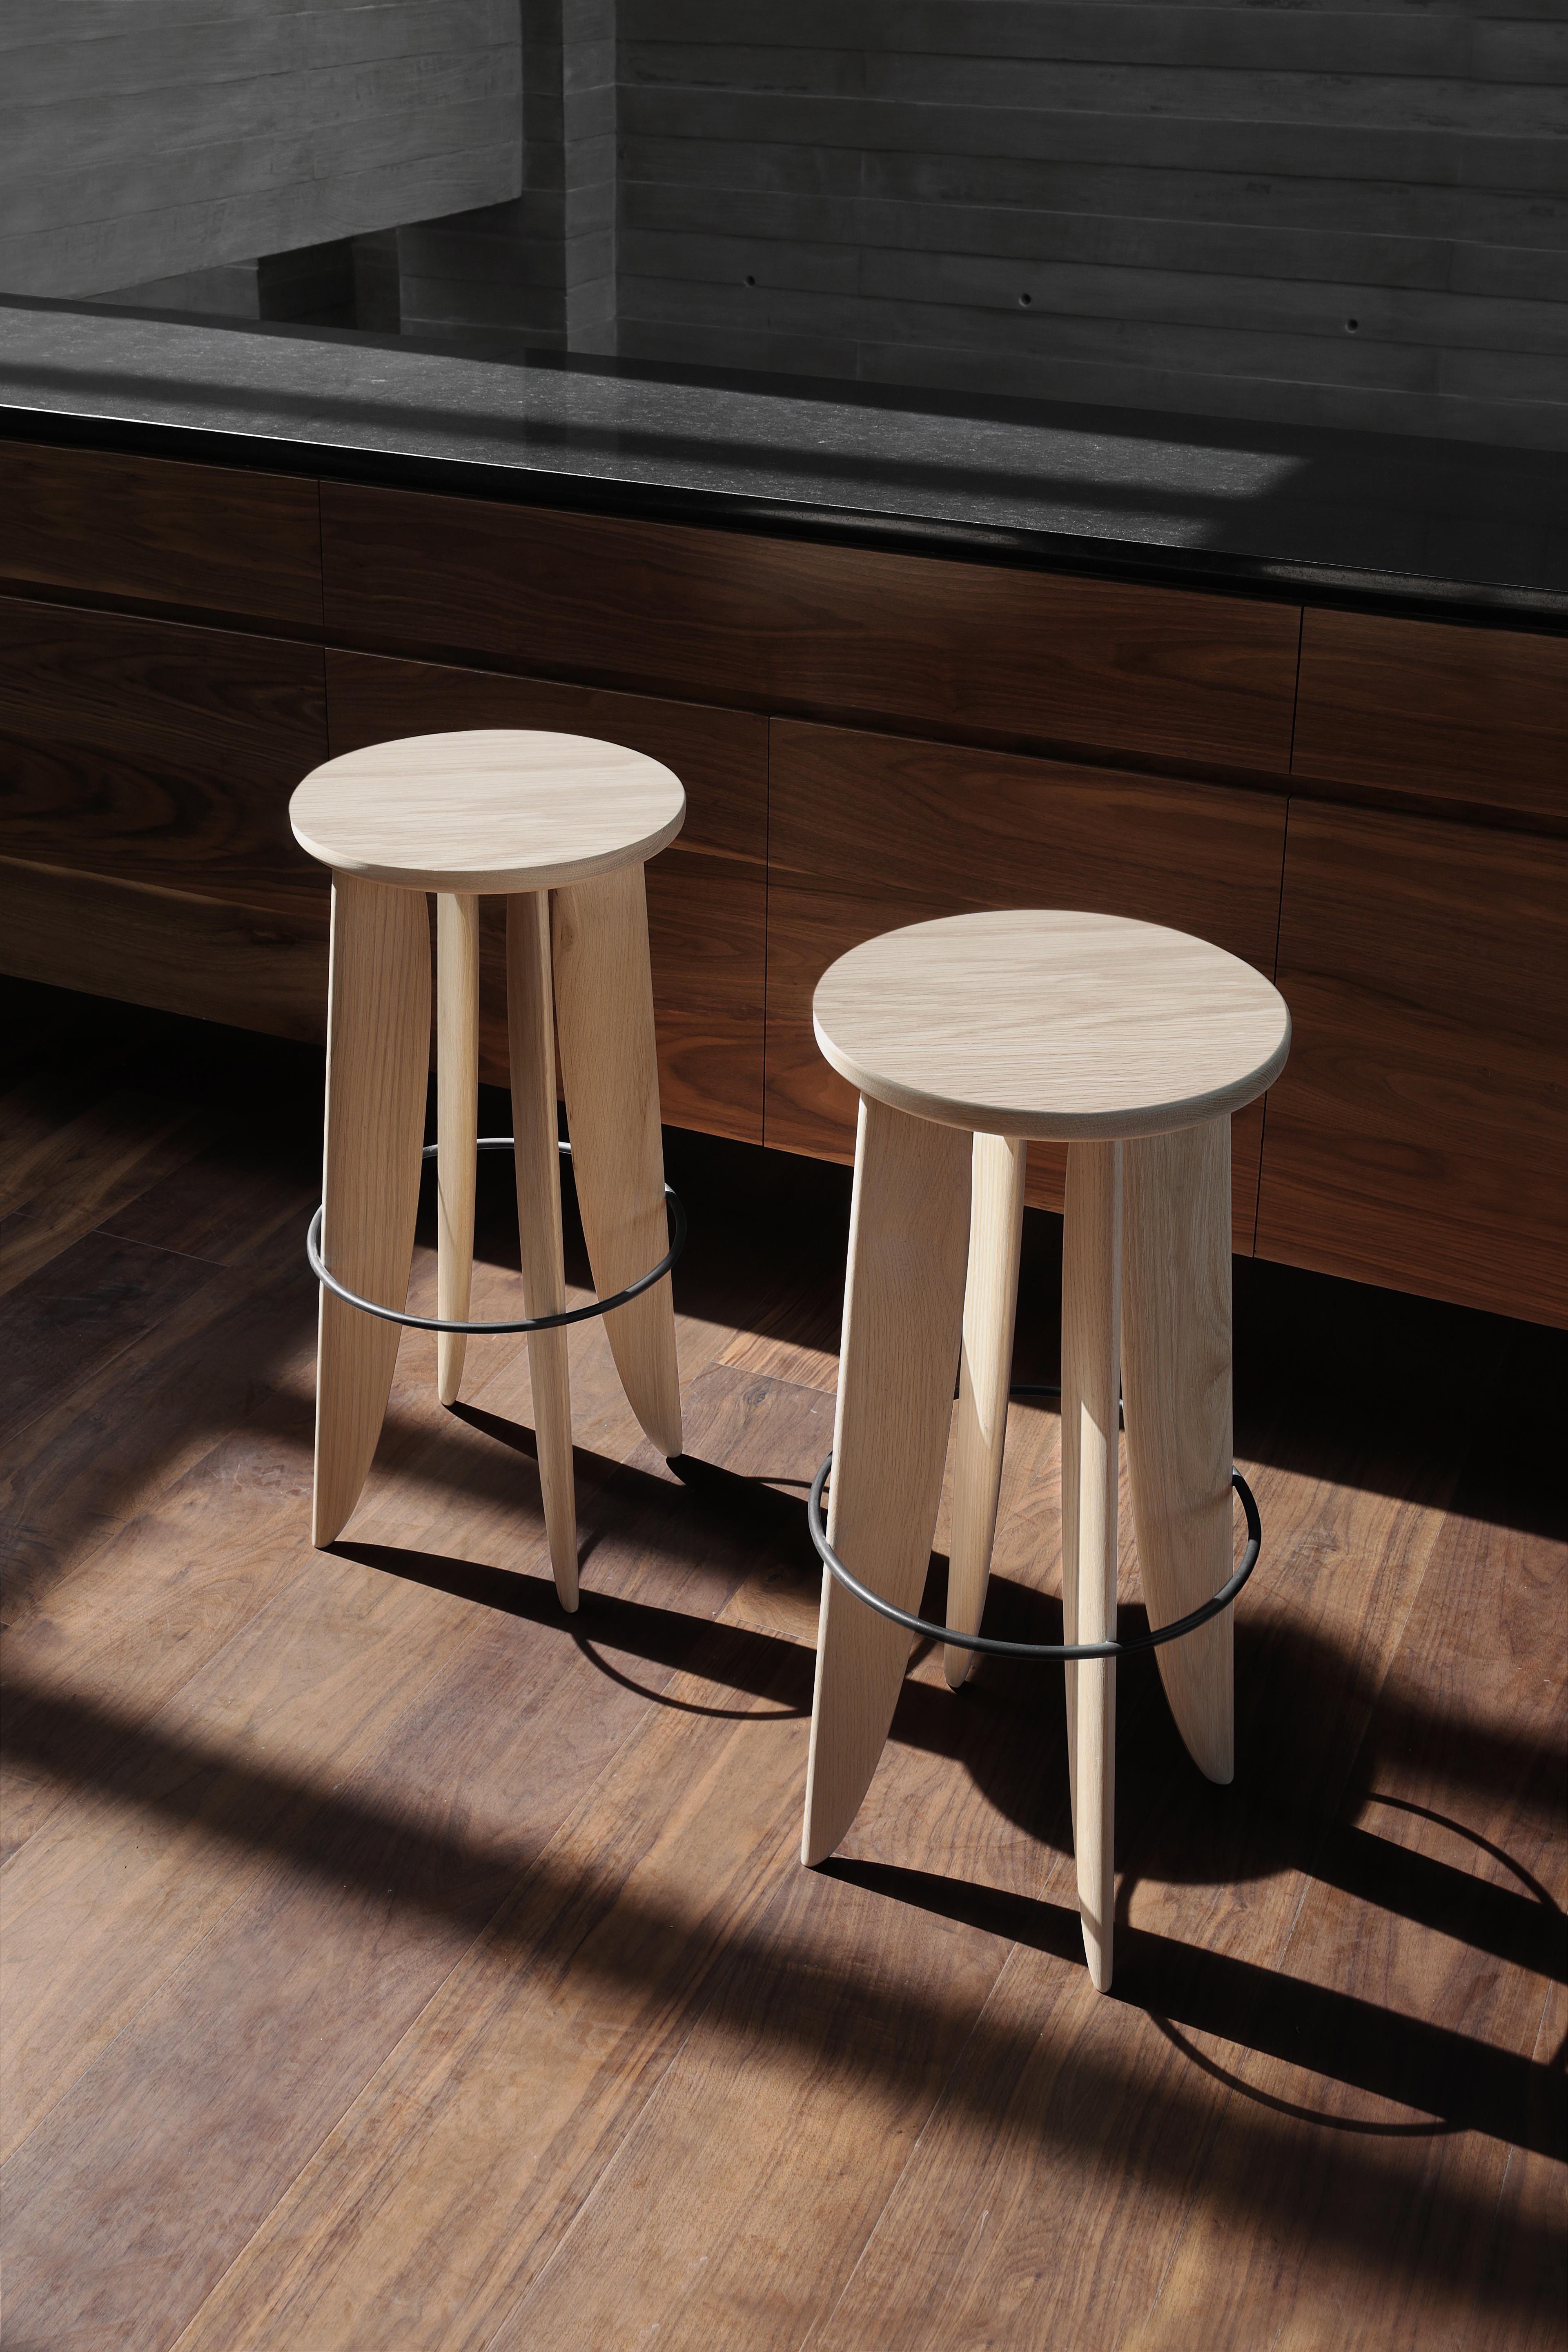 Set of Two Noviembre XIII Counter Stool in Oak Wood by Joel Escalona

The Noviembre collection is inspired by the creative values of Constantin Brancusi, a Romanian sculptor considered one of the most influential artists of the twentieth century,